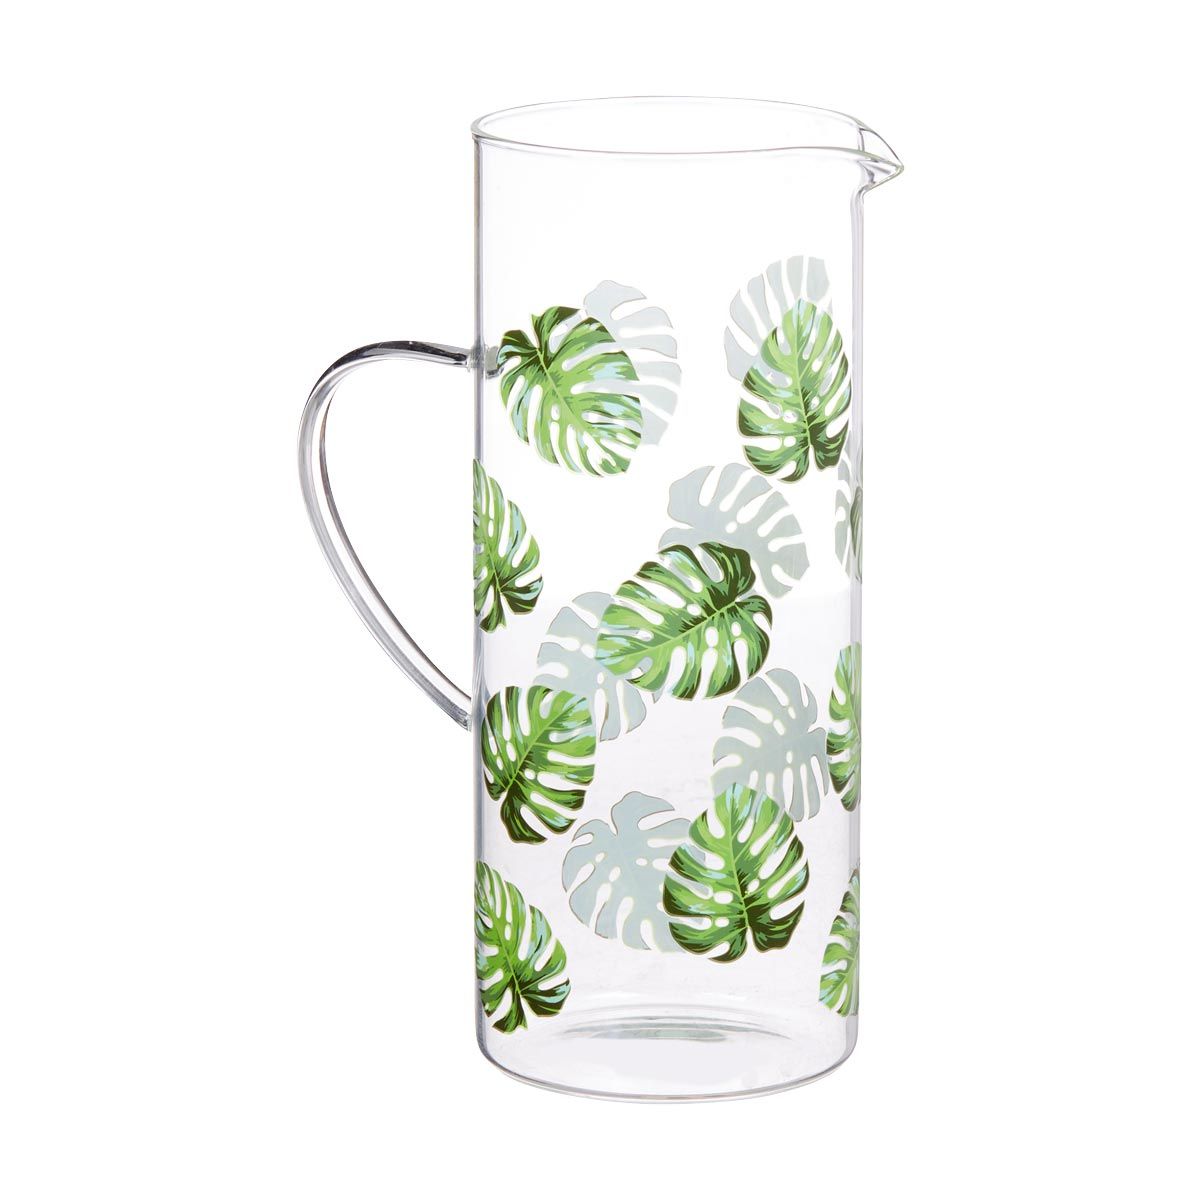 Tropical Leaves Printed Pitcher on Sale At Dollar General